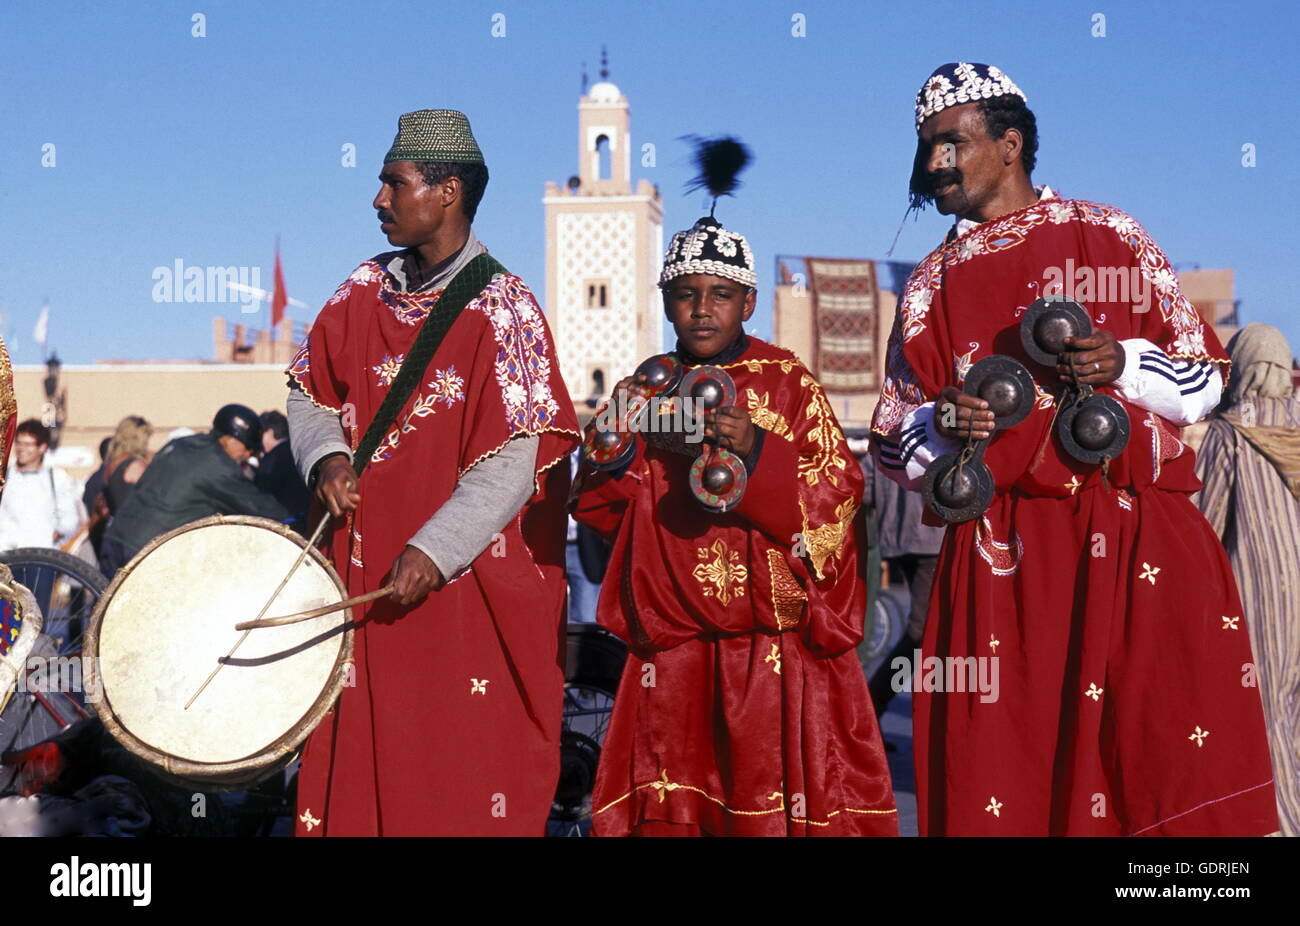 Traditional Music player at the Djemma del Fna Square in the old town of Marrakesh in Morocco in North Africa. Stock Photo